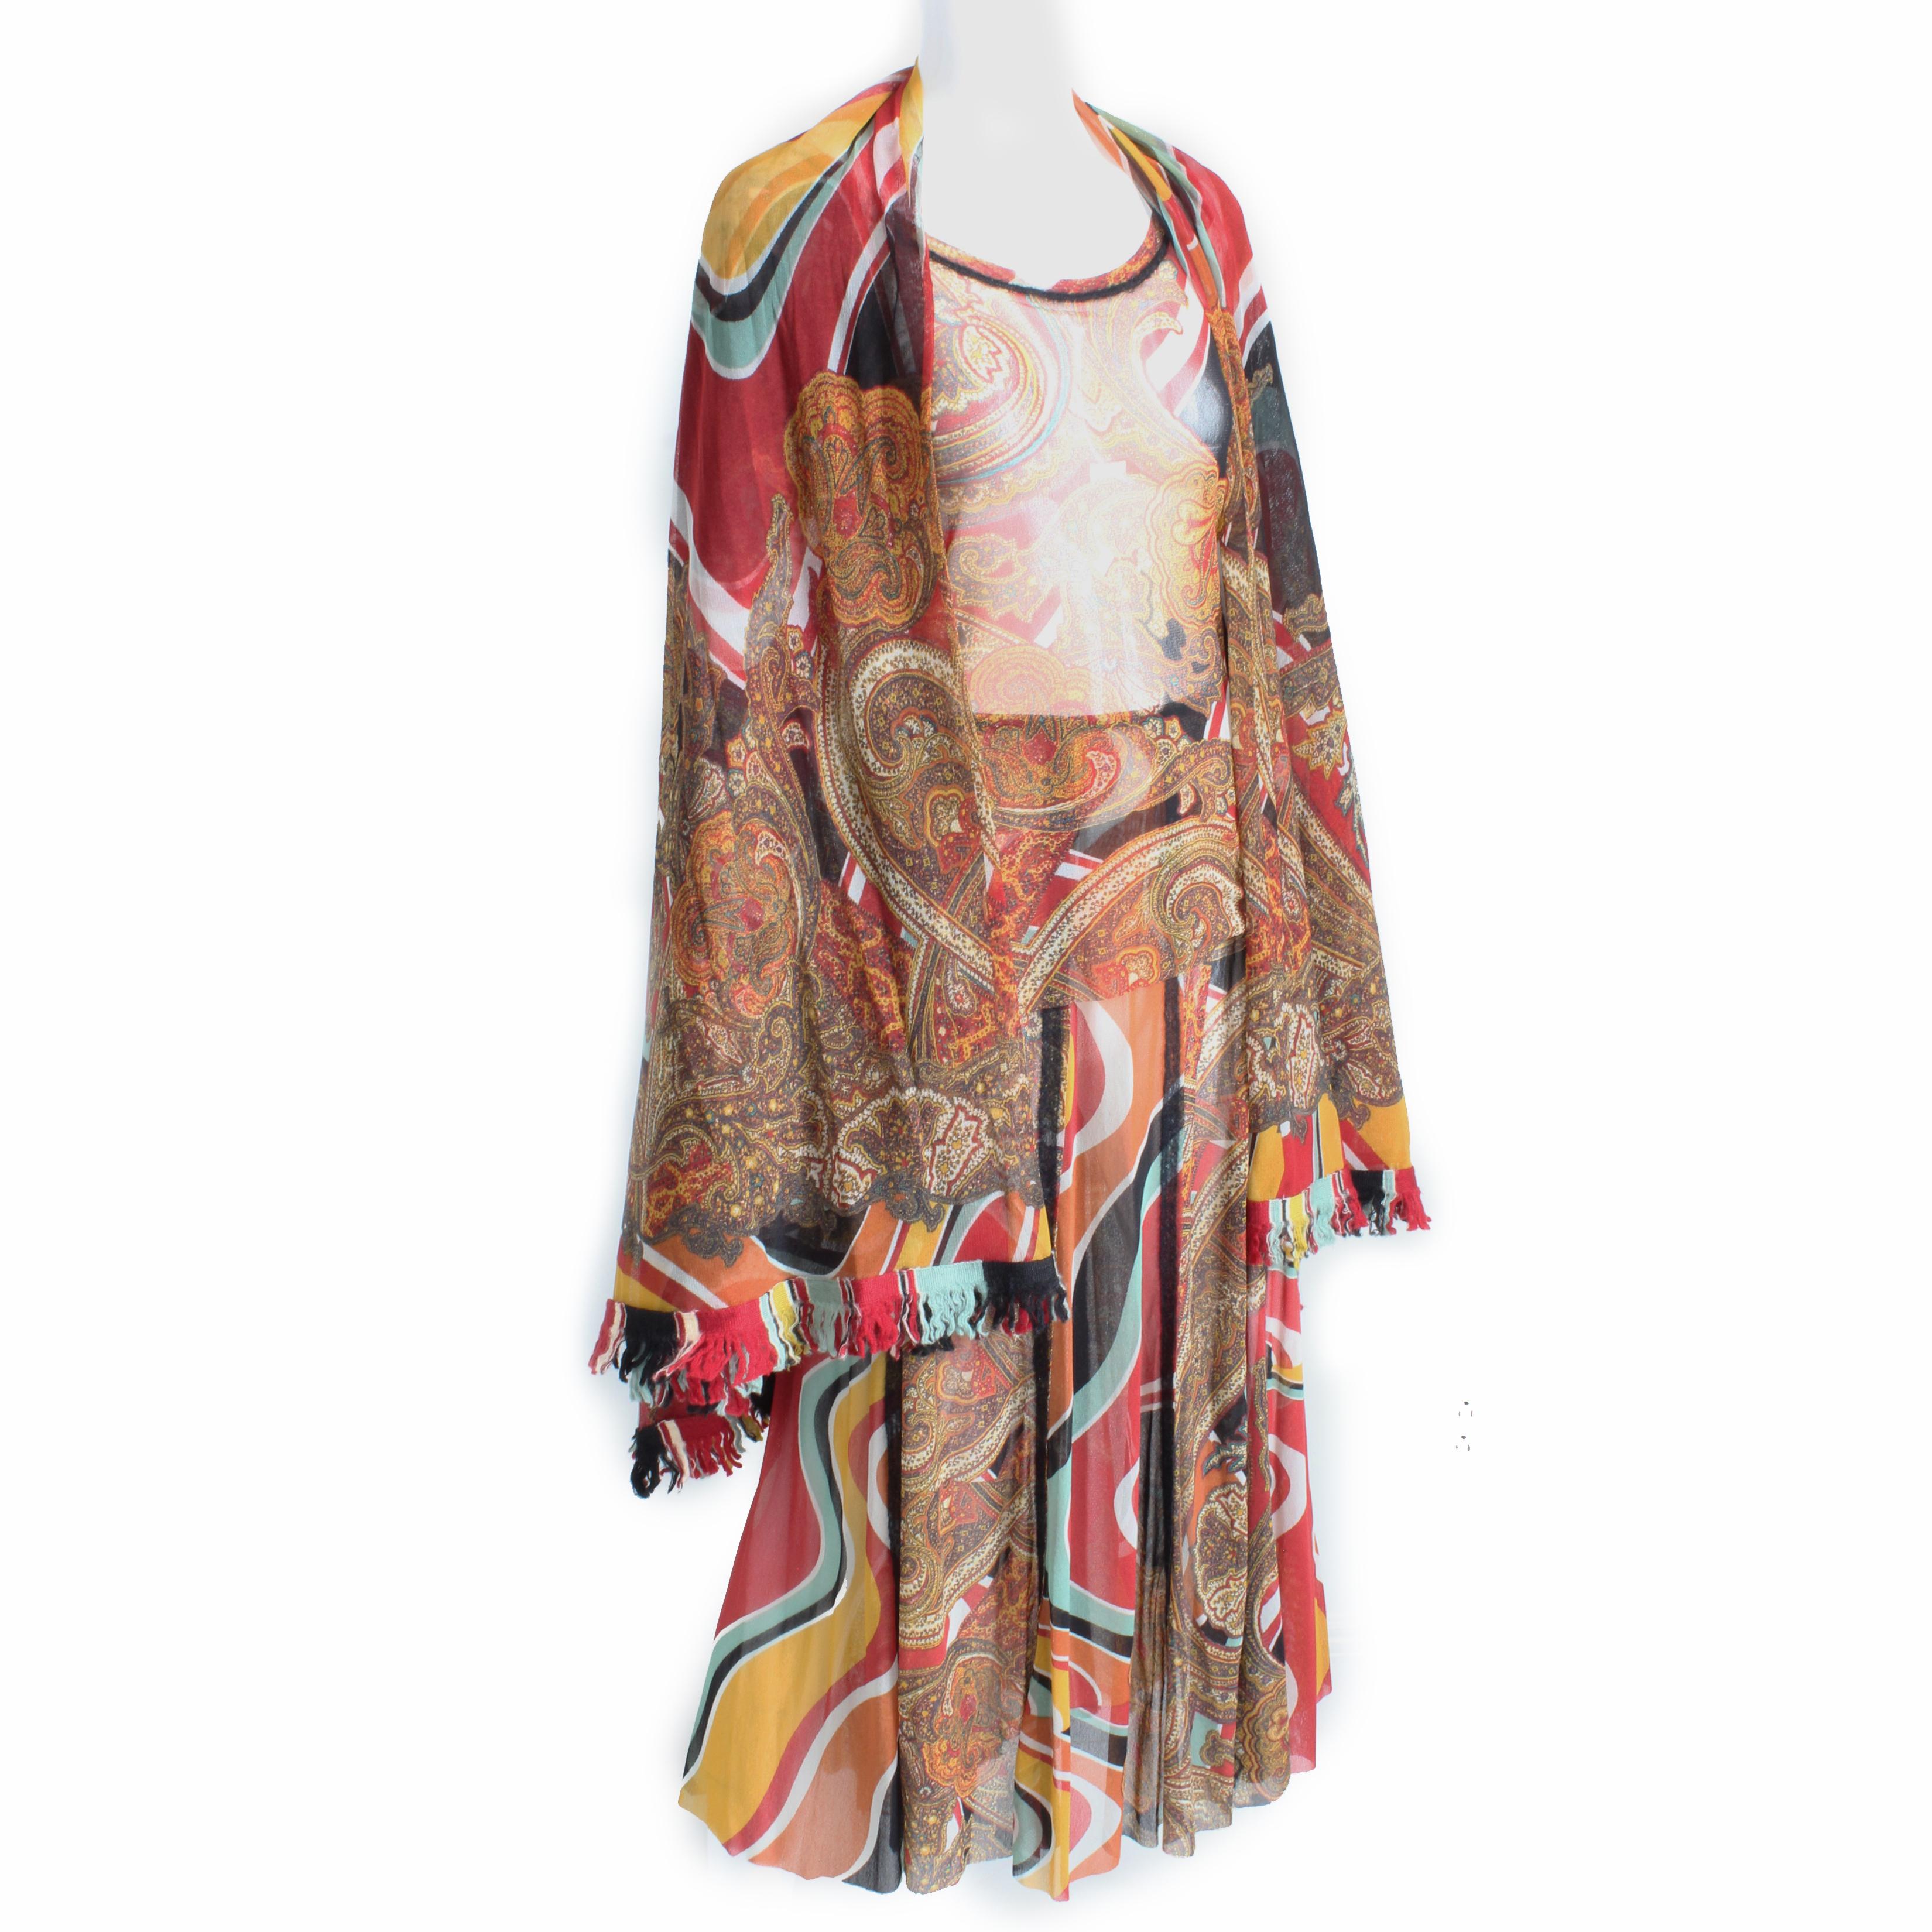 Jean Paul Gaultier 3pc Set Mesh Top Skirt Shawl Sheer Colorful Rare 90s Vintage For Sale 3